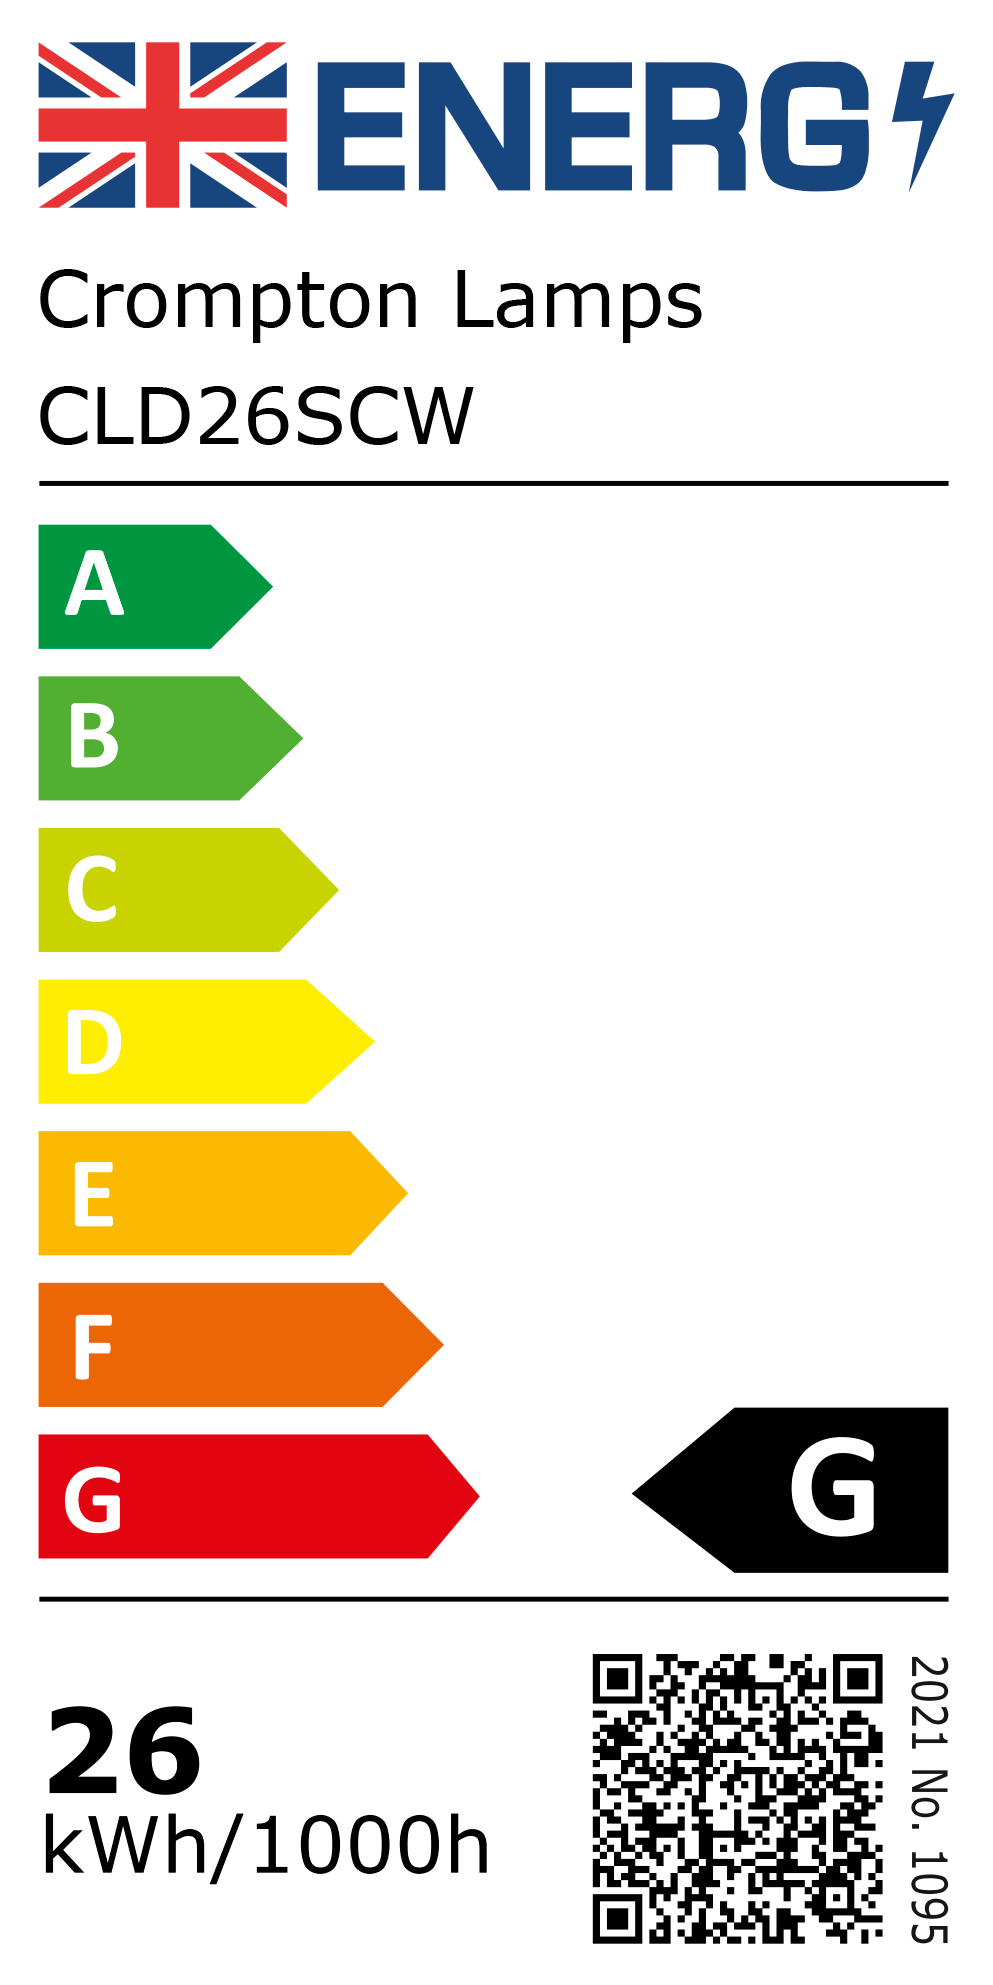 New 2021 Energy Rating Label: Stock Code CLD26SCW